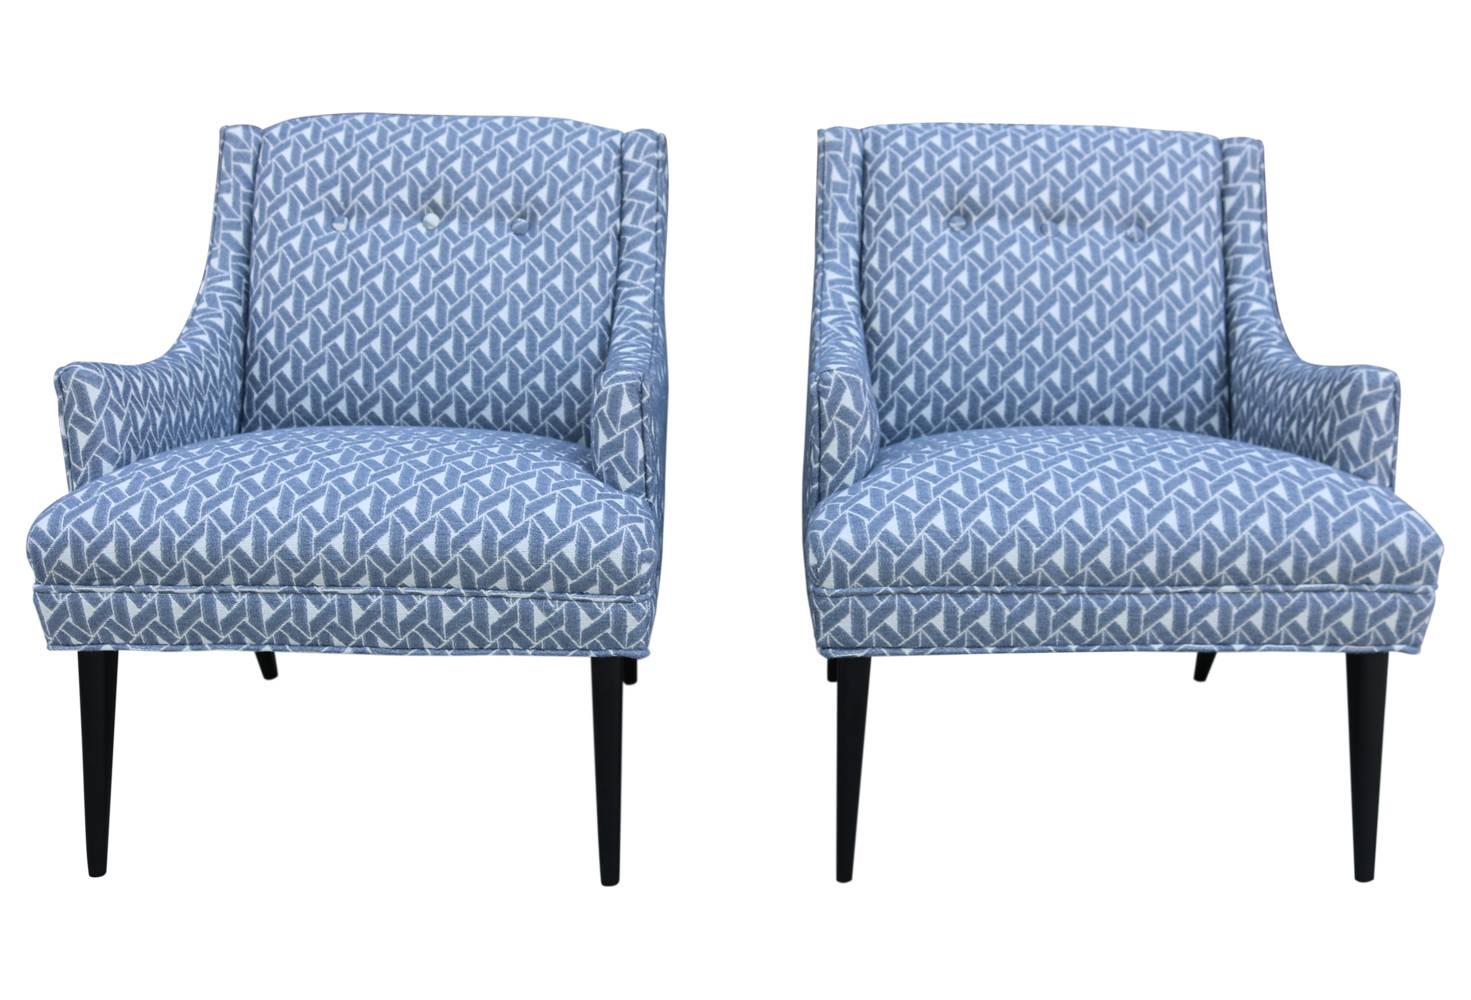 These are adorable, petite and perfect for a cozy space! These Mid-Century armchairs have been lovingly restored, legs ebonized and covered in a lovely, plush geometric fabric.